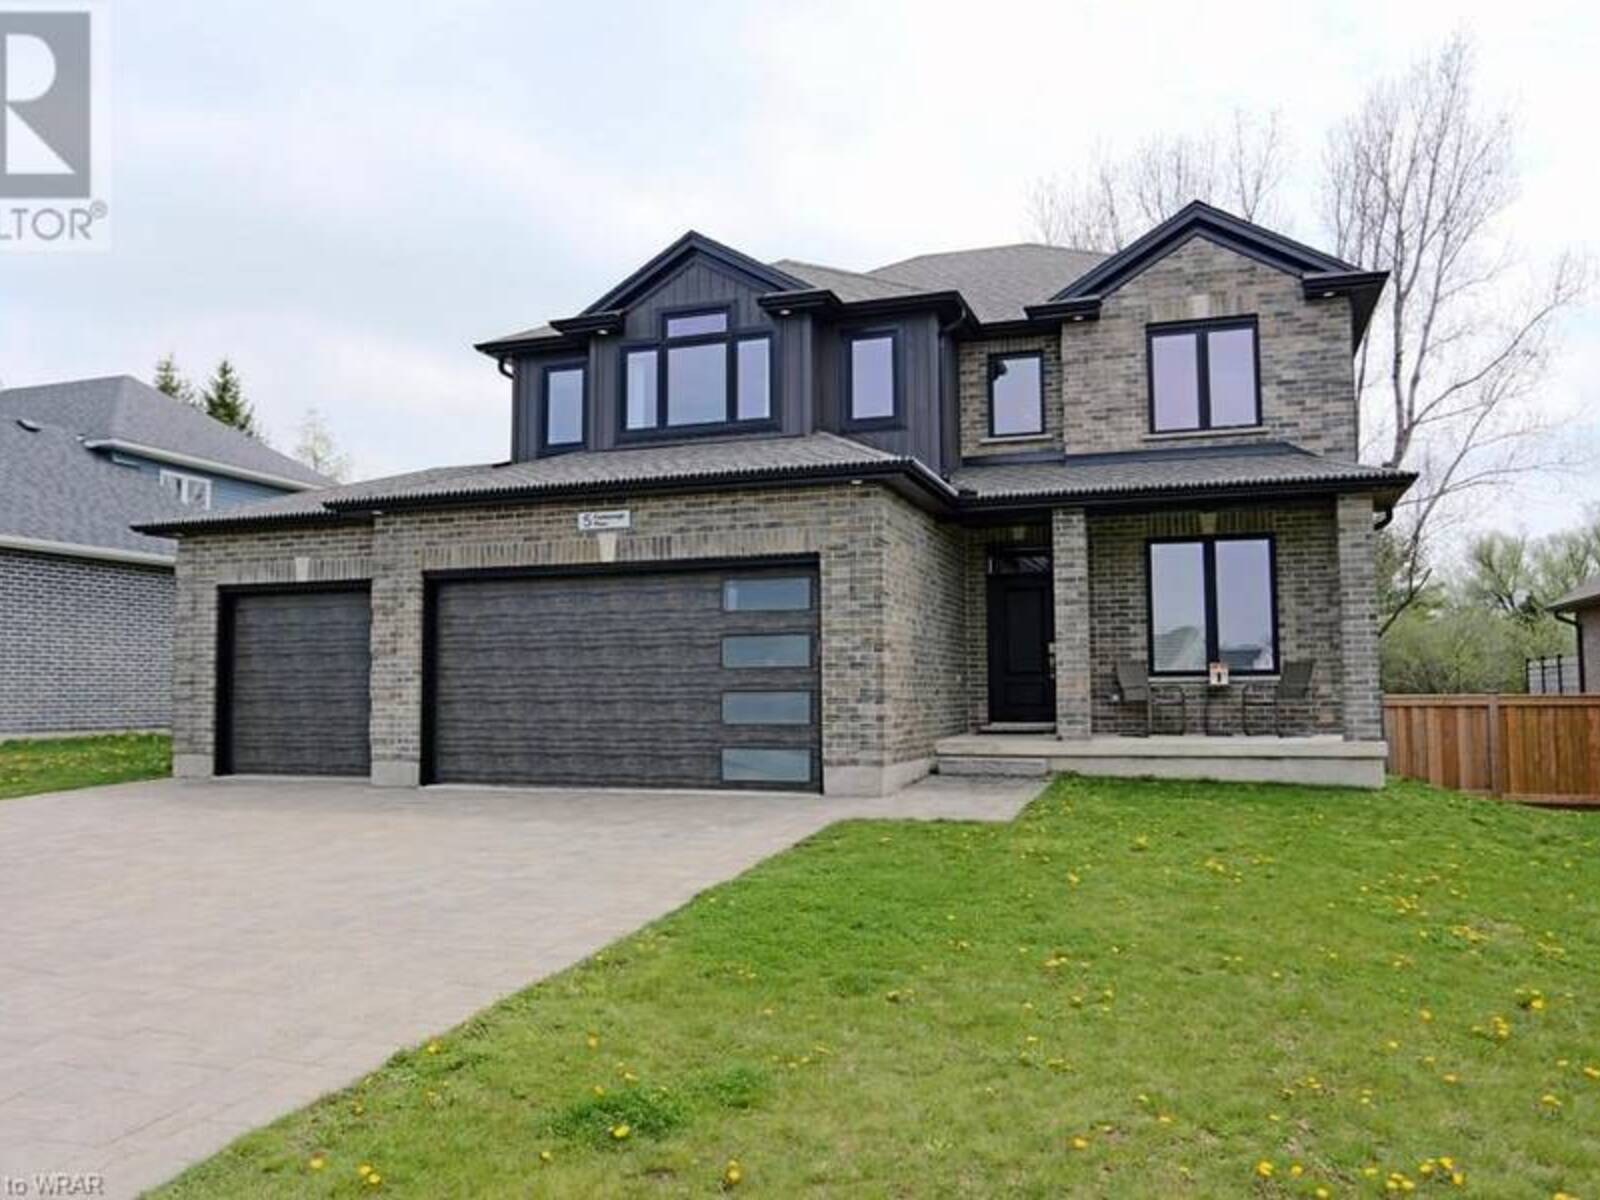 5 FOXBOROUGH PLACE Place, Thorndale, Ontario N0M 2P0